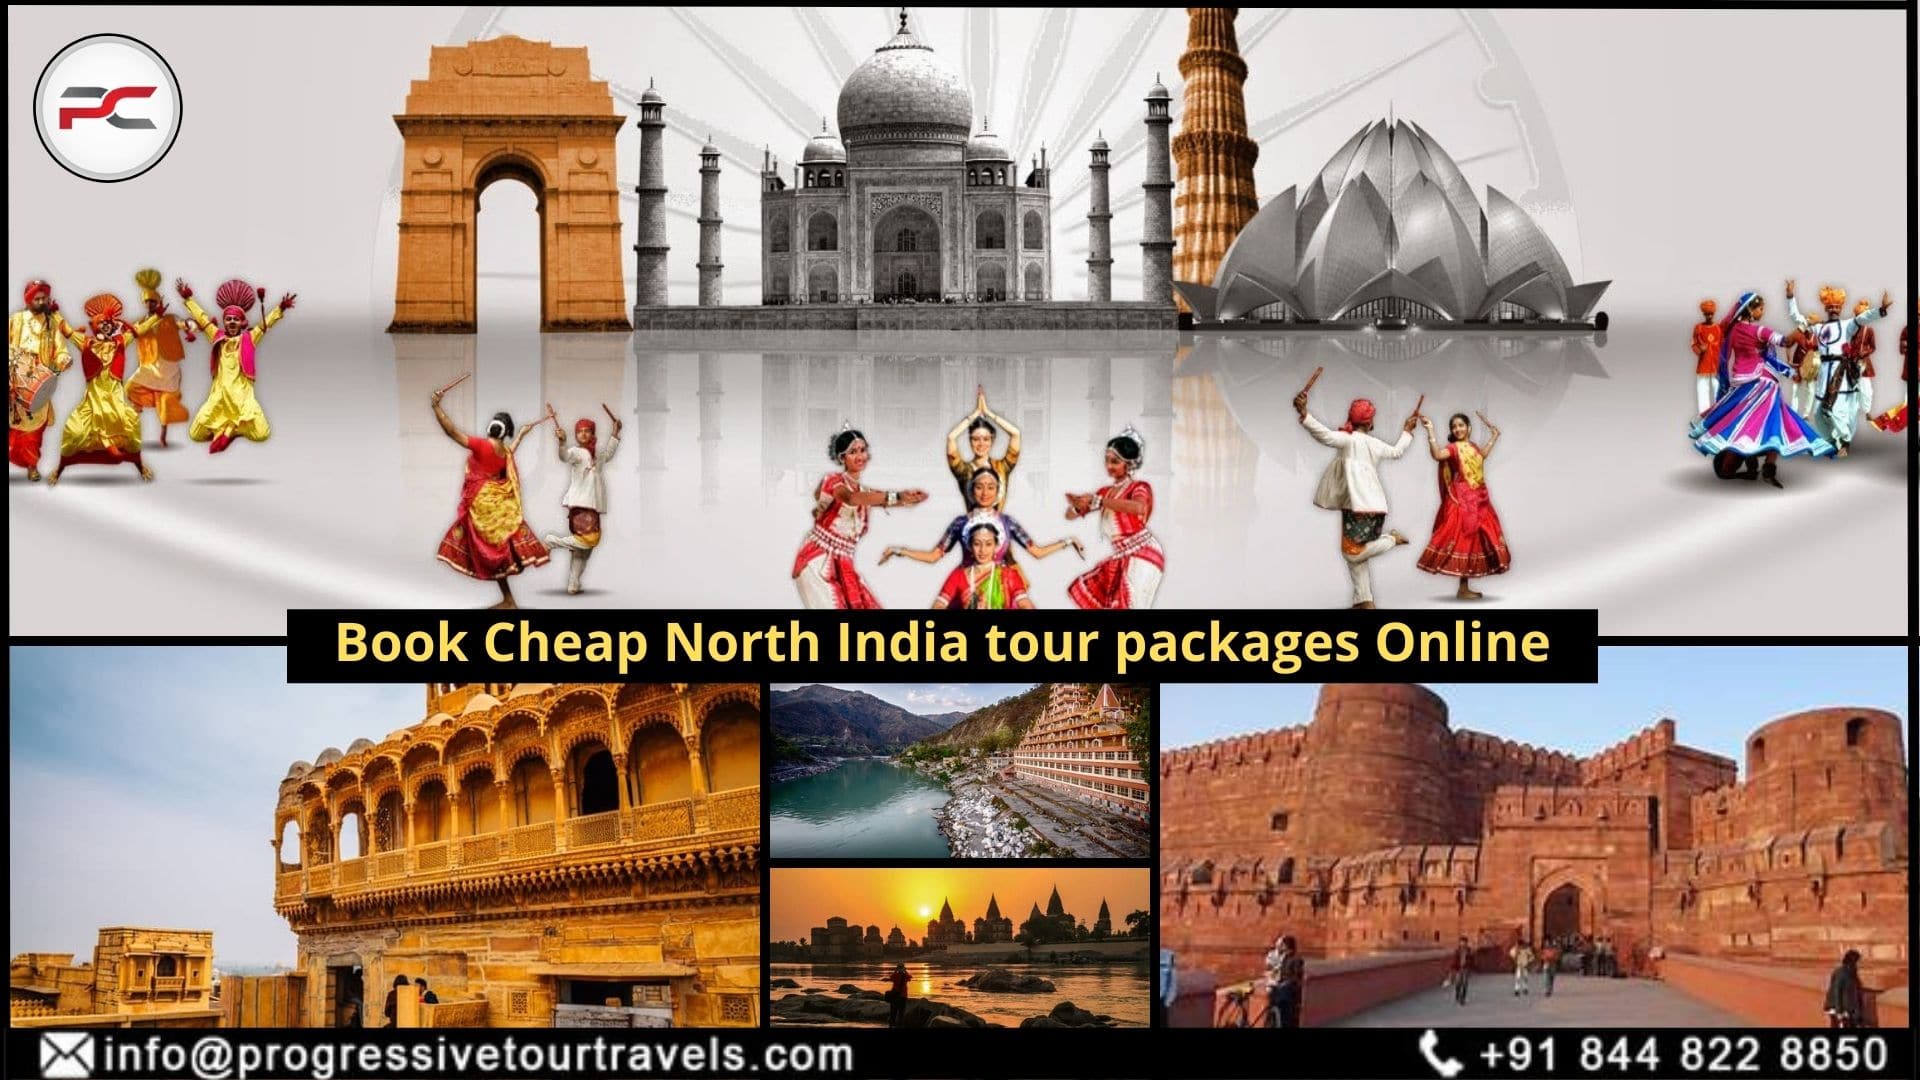 Book Cheap North India tour packages Online-f8403d0c